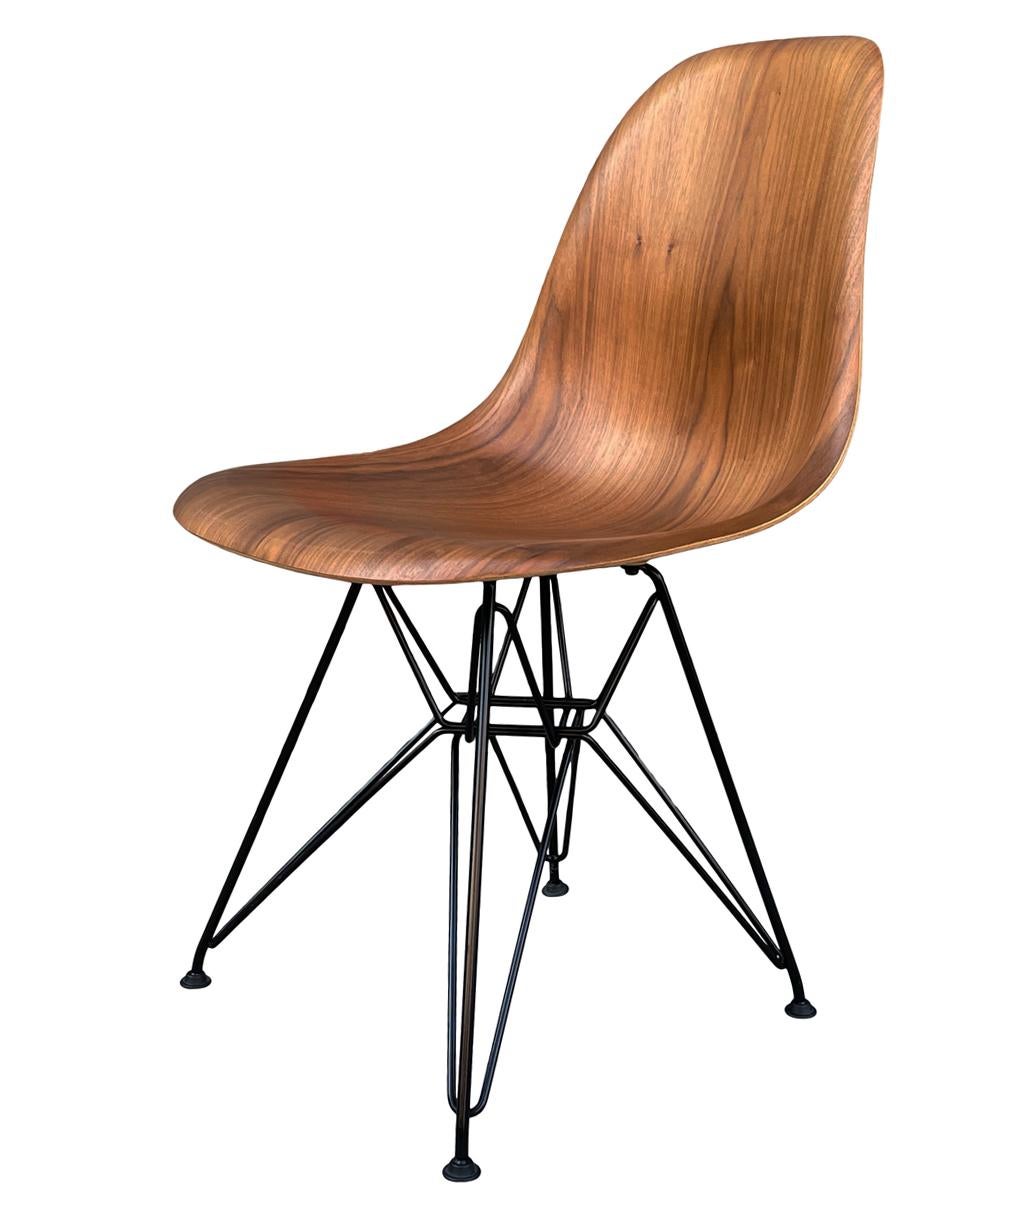 Set of 8 Mid-Century Modern Walnut Wood Shell Dining Chairs by Charles Eames For Sale 2